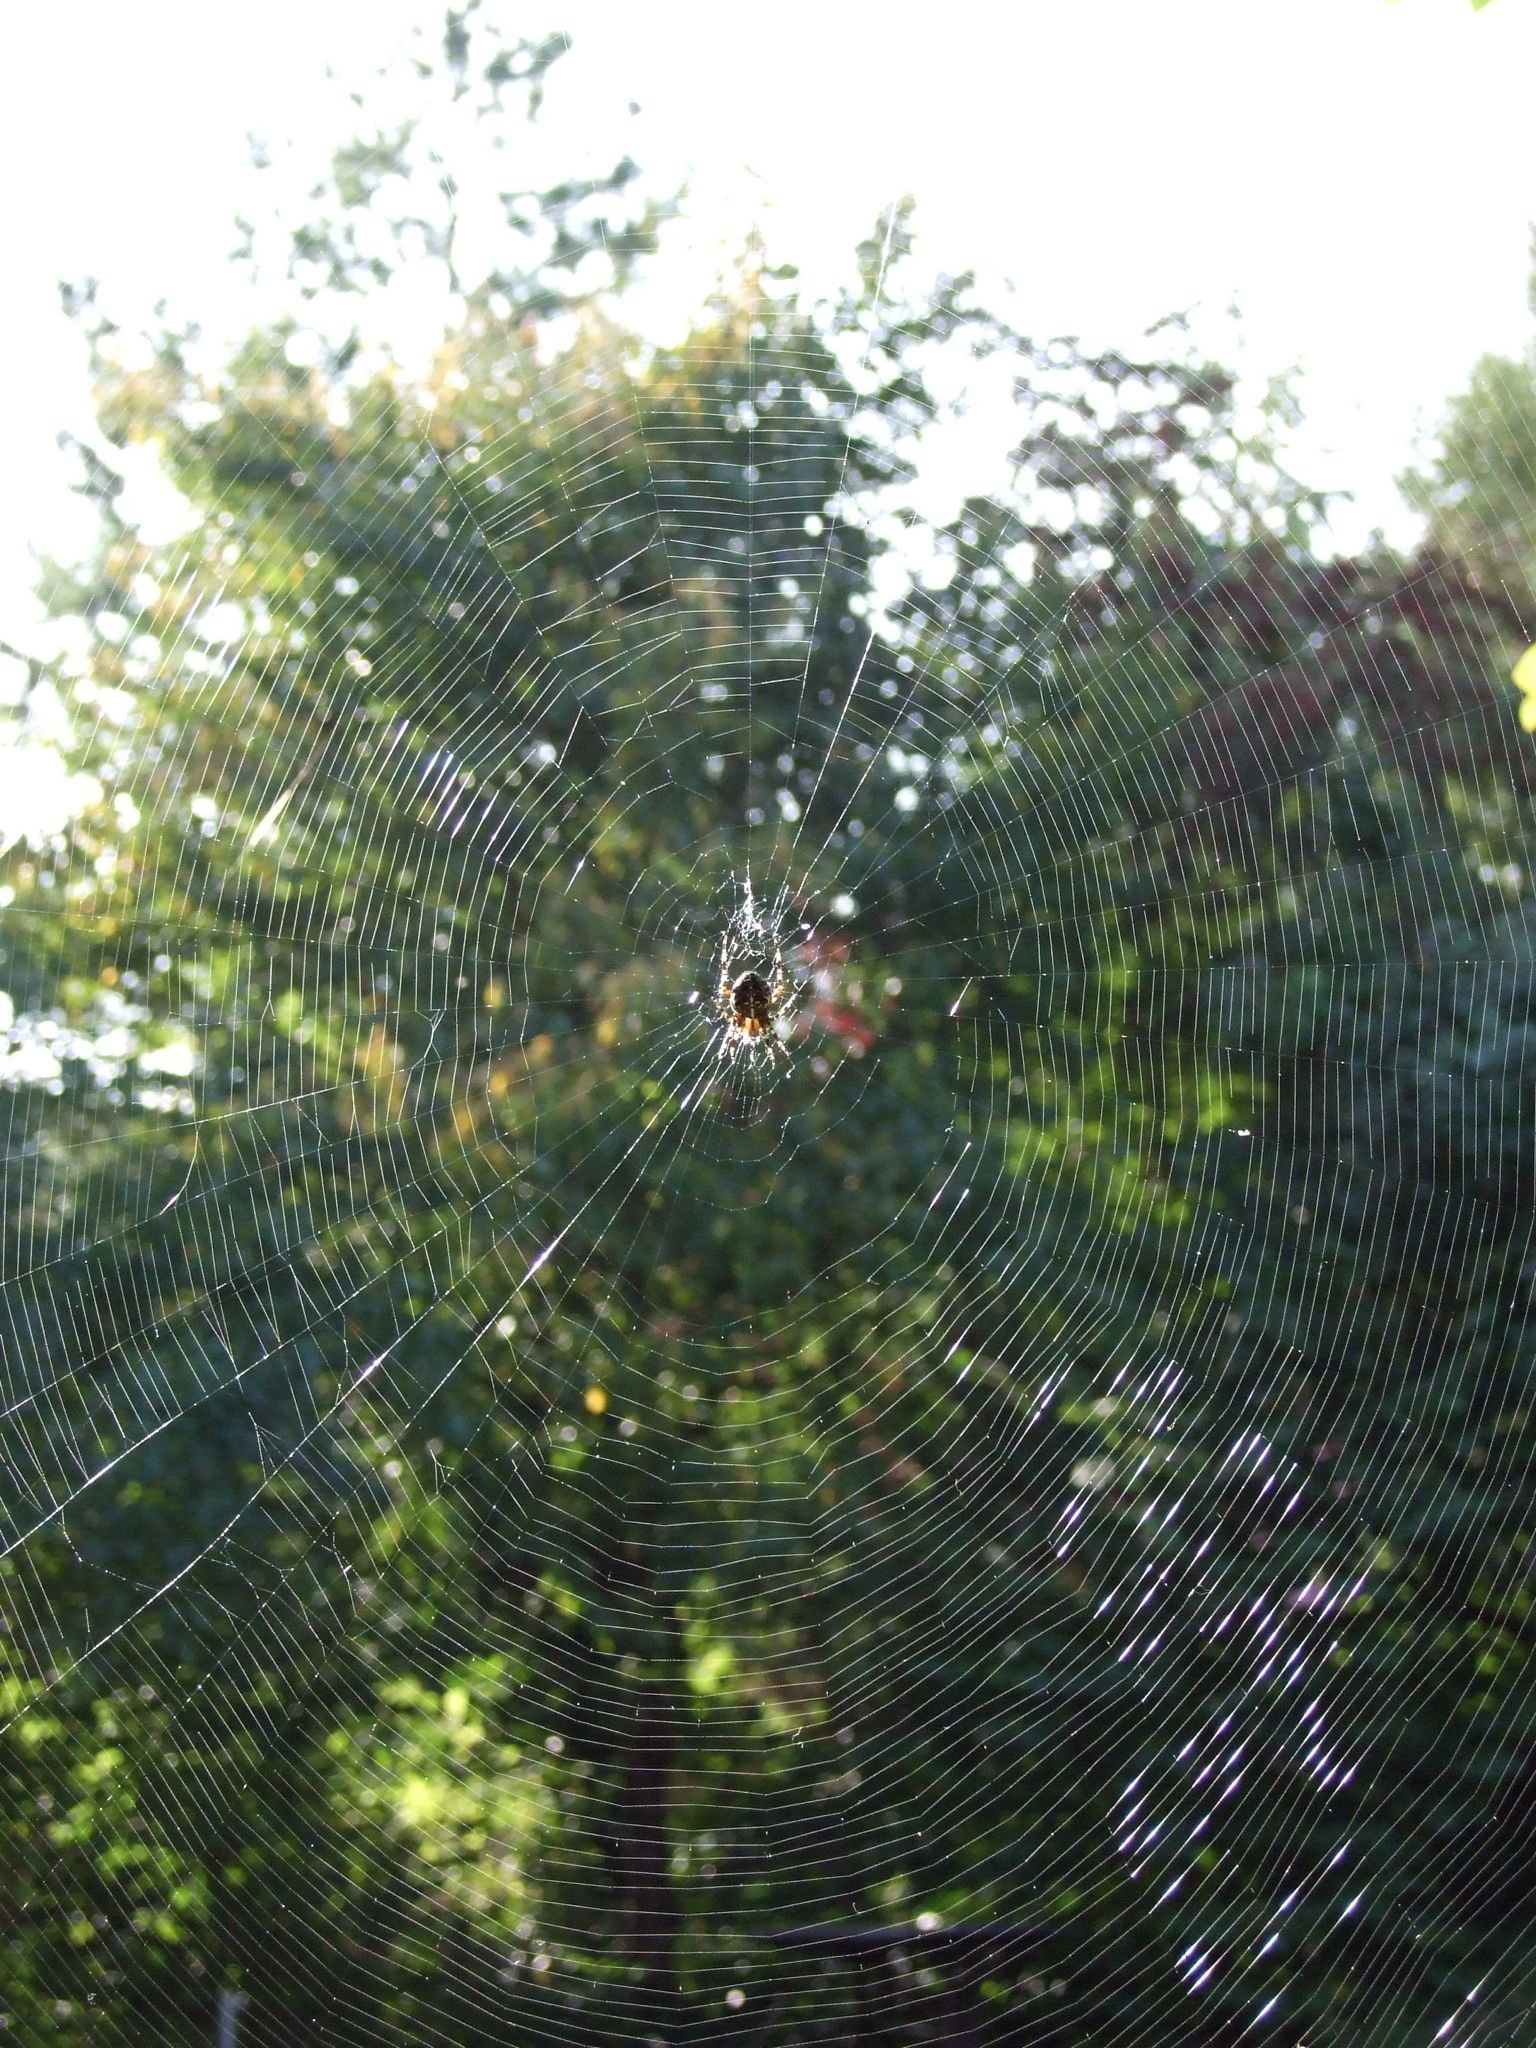 Photo 17 of 23 from the album Spiders.